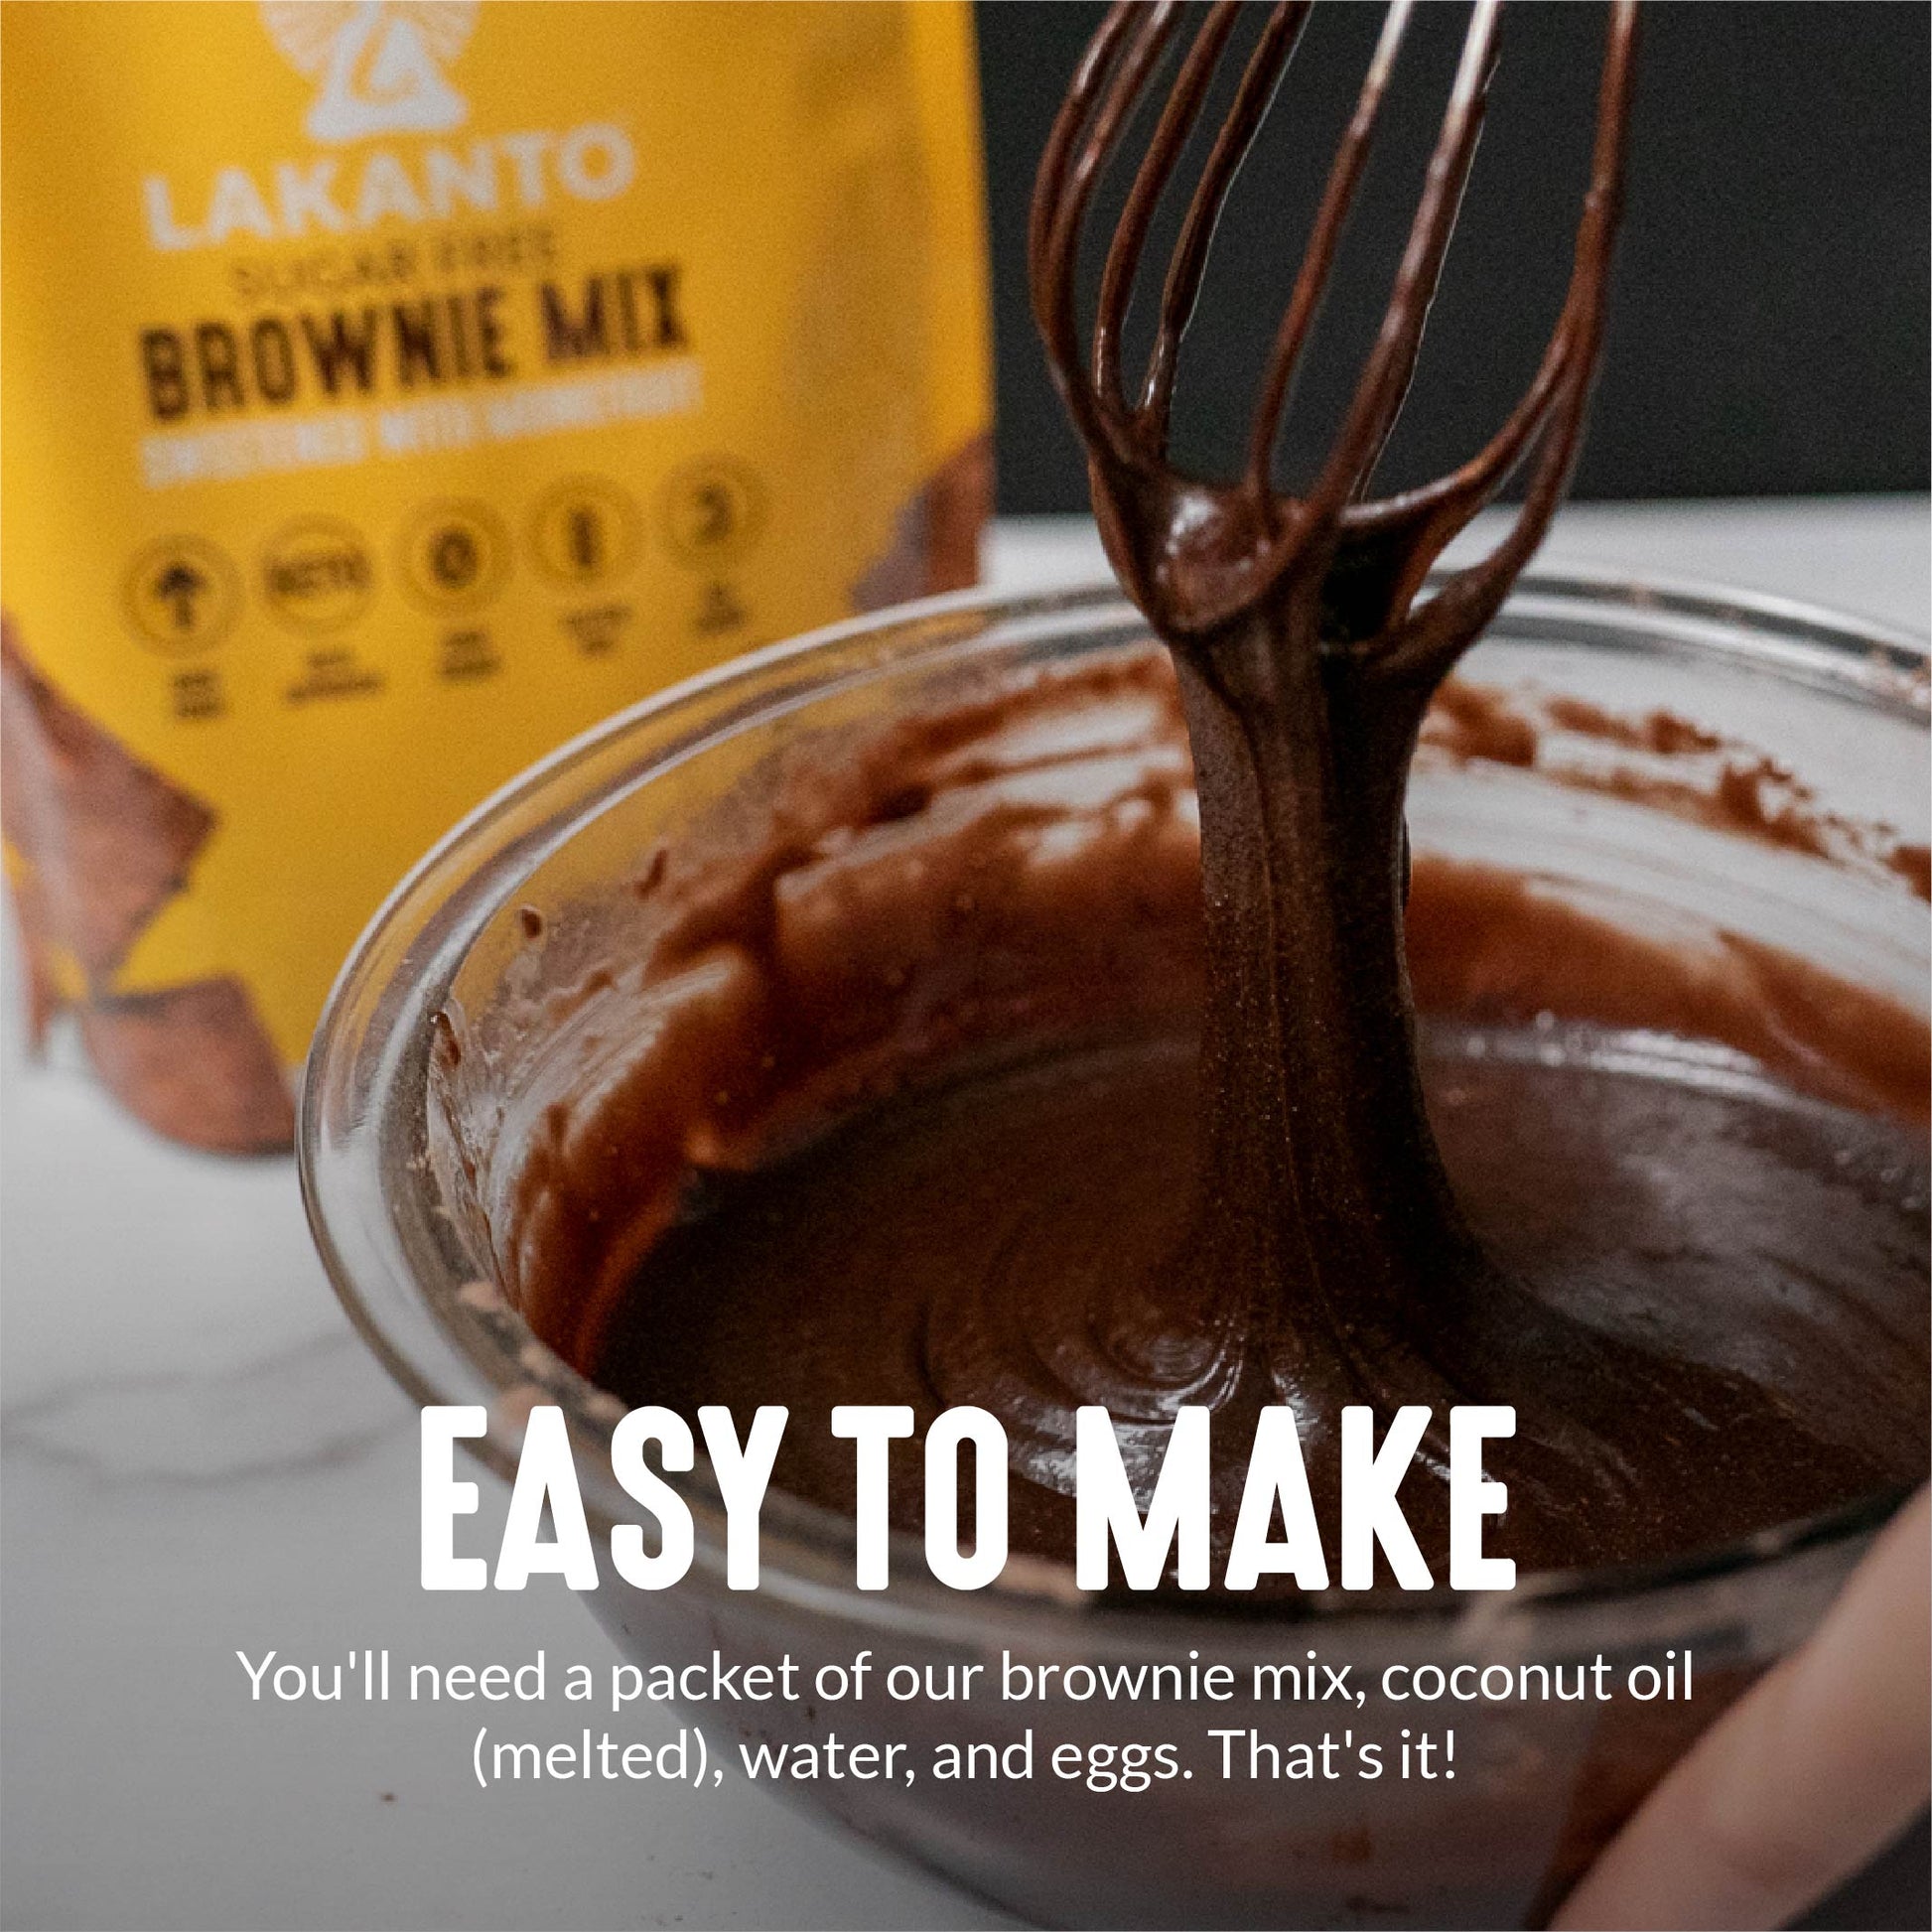 How to bake with Lakanto Brownie Mix